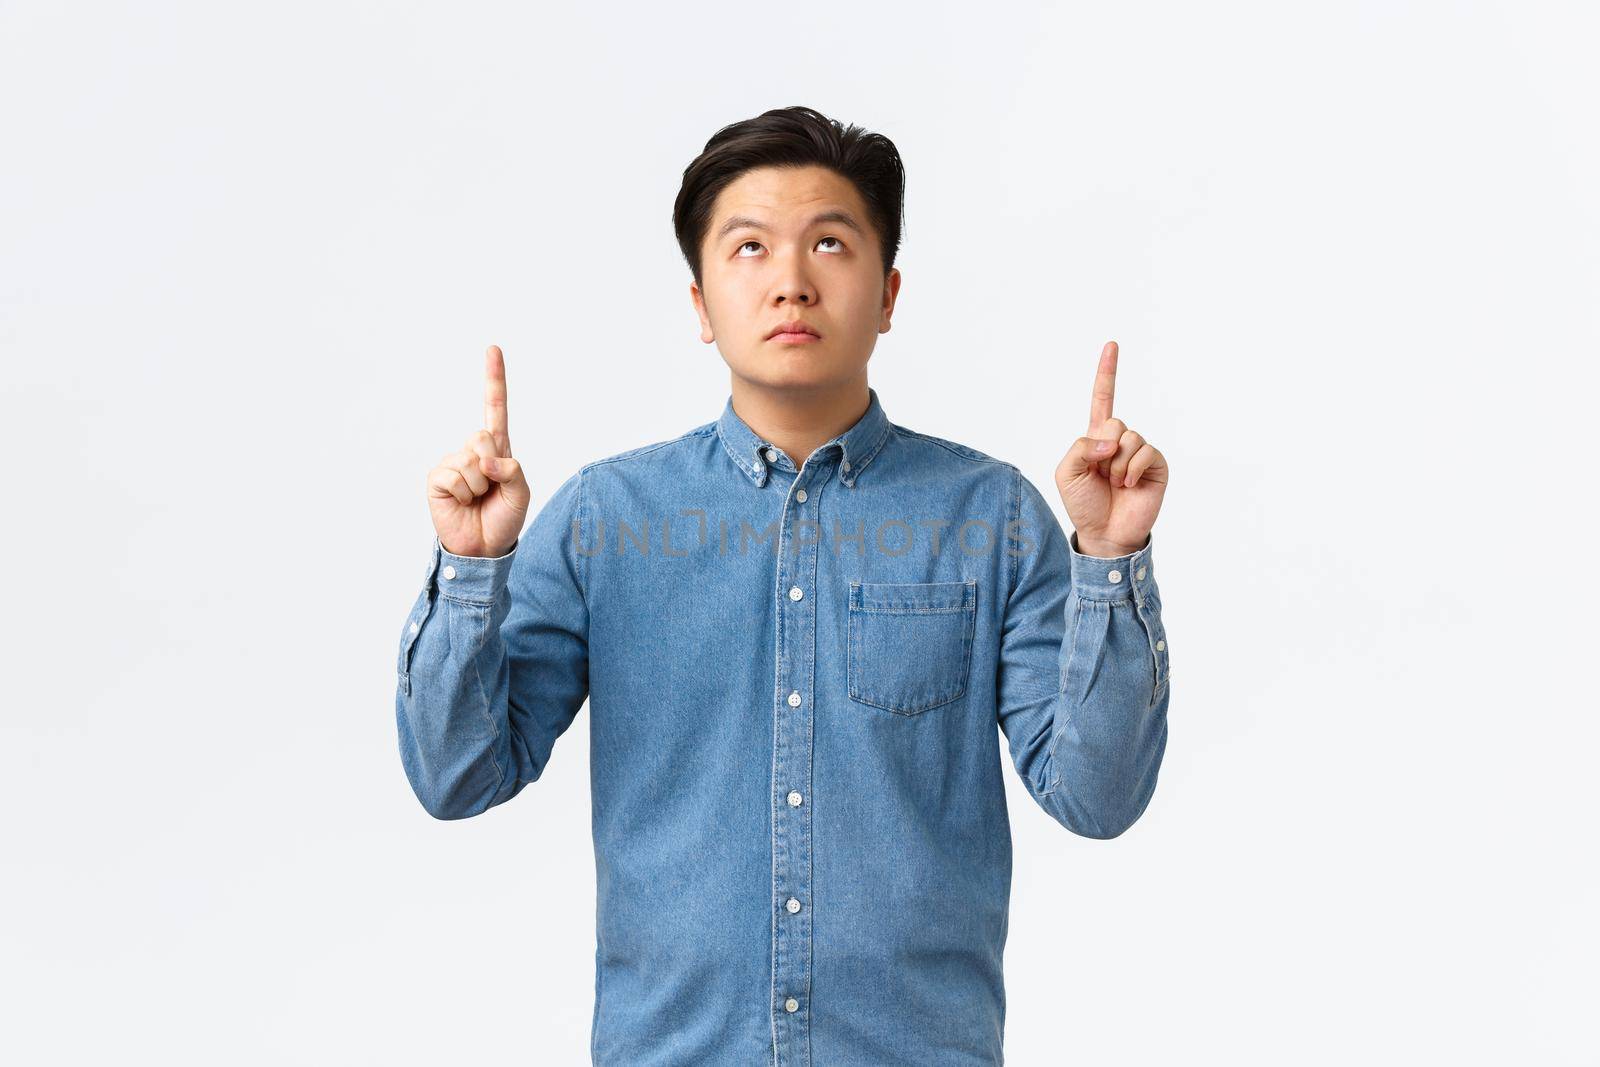 Unamused bored asian guy in blue shirt, looking and pointing fingers up with poker face, no emotions, being careless about information upwards, reading sign without interest, white background by Benzoix